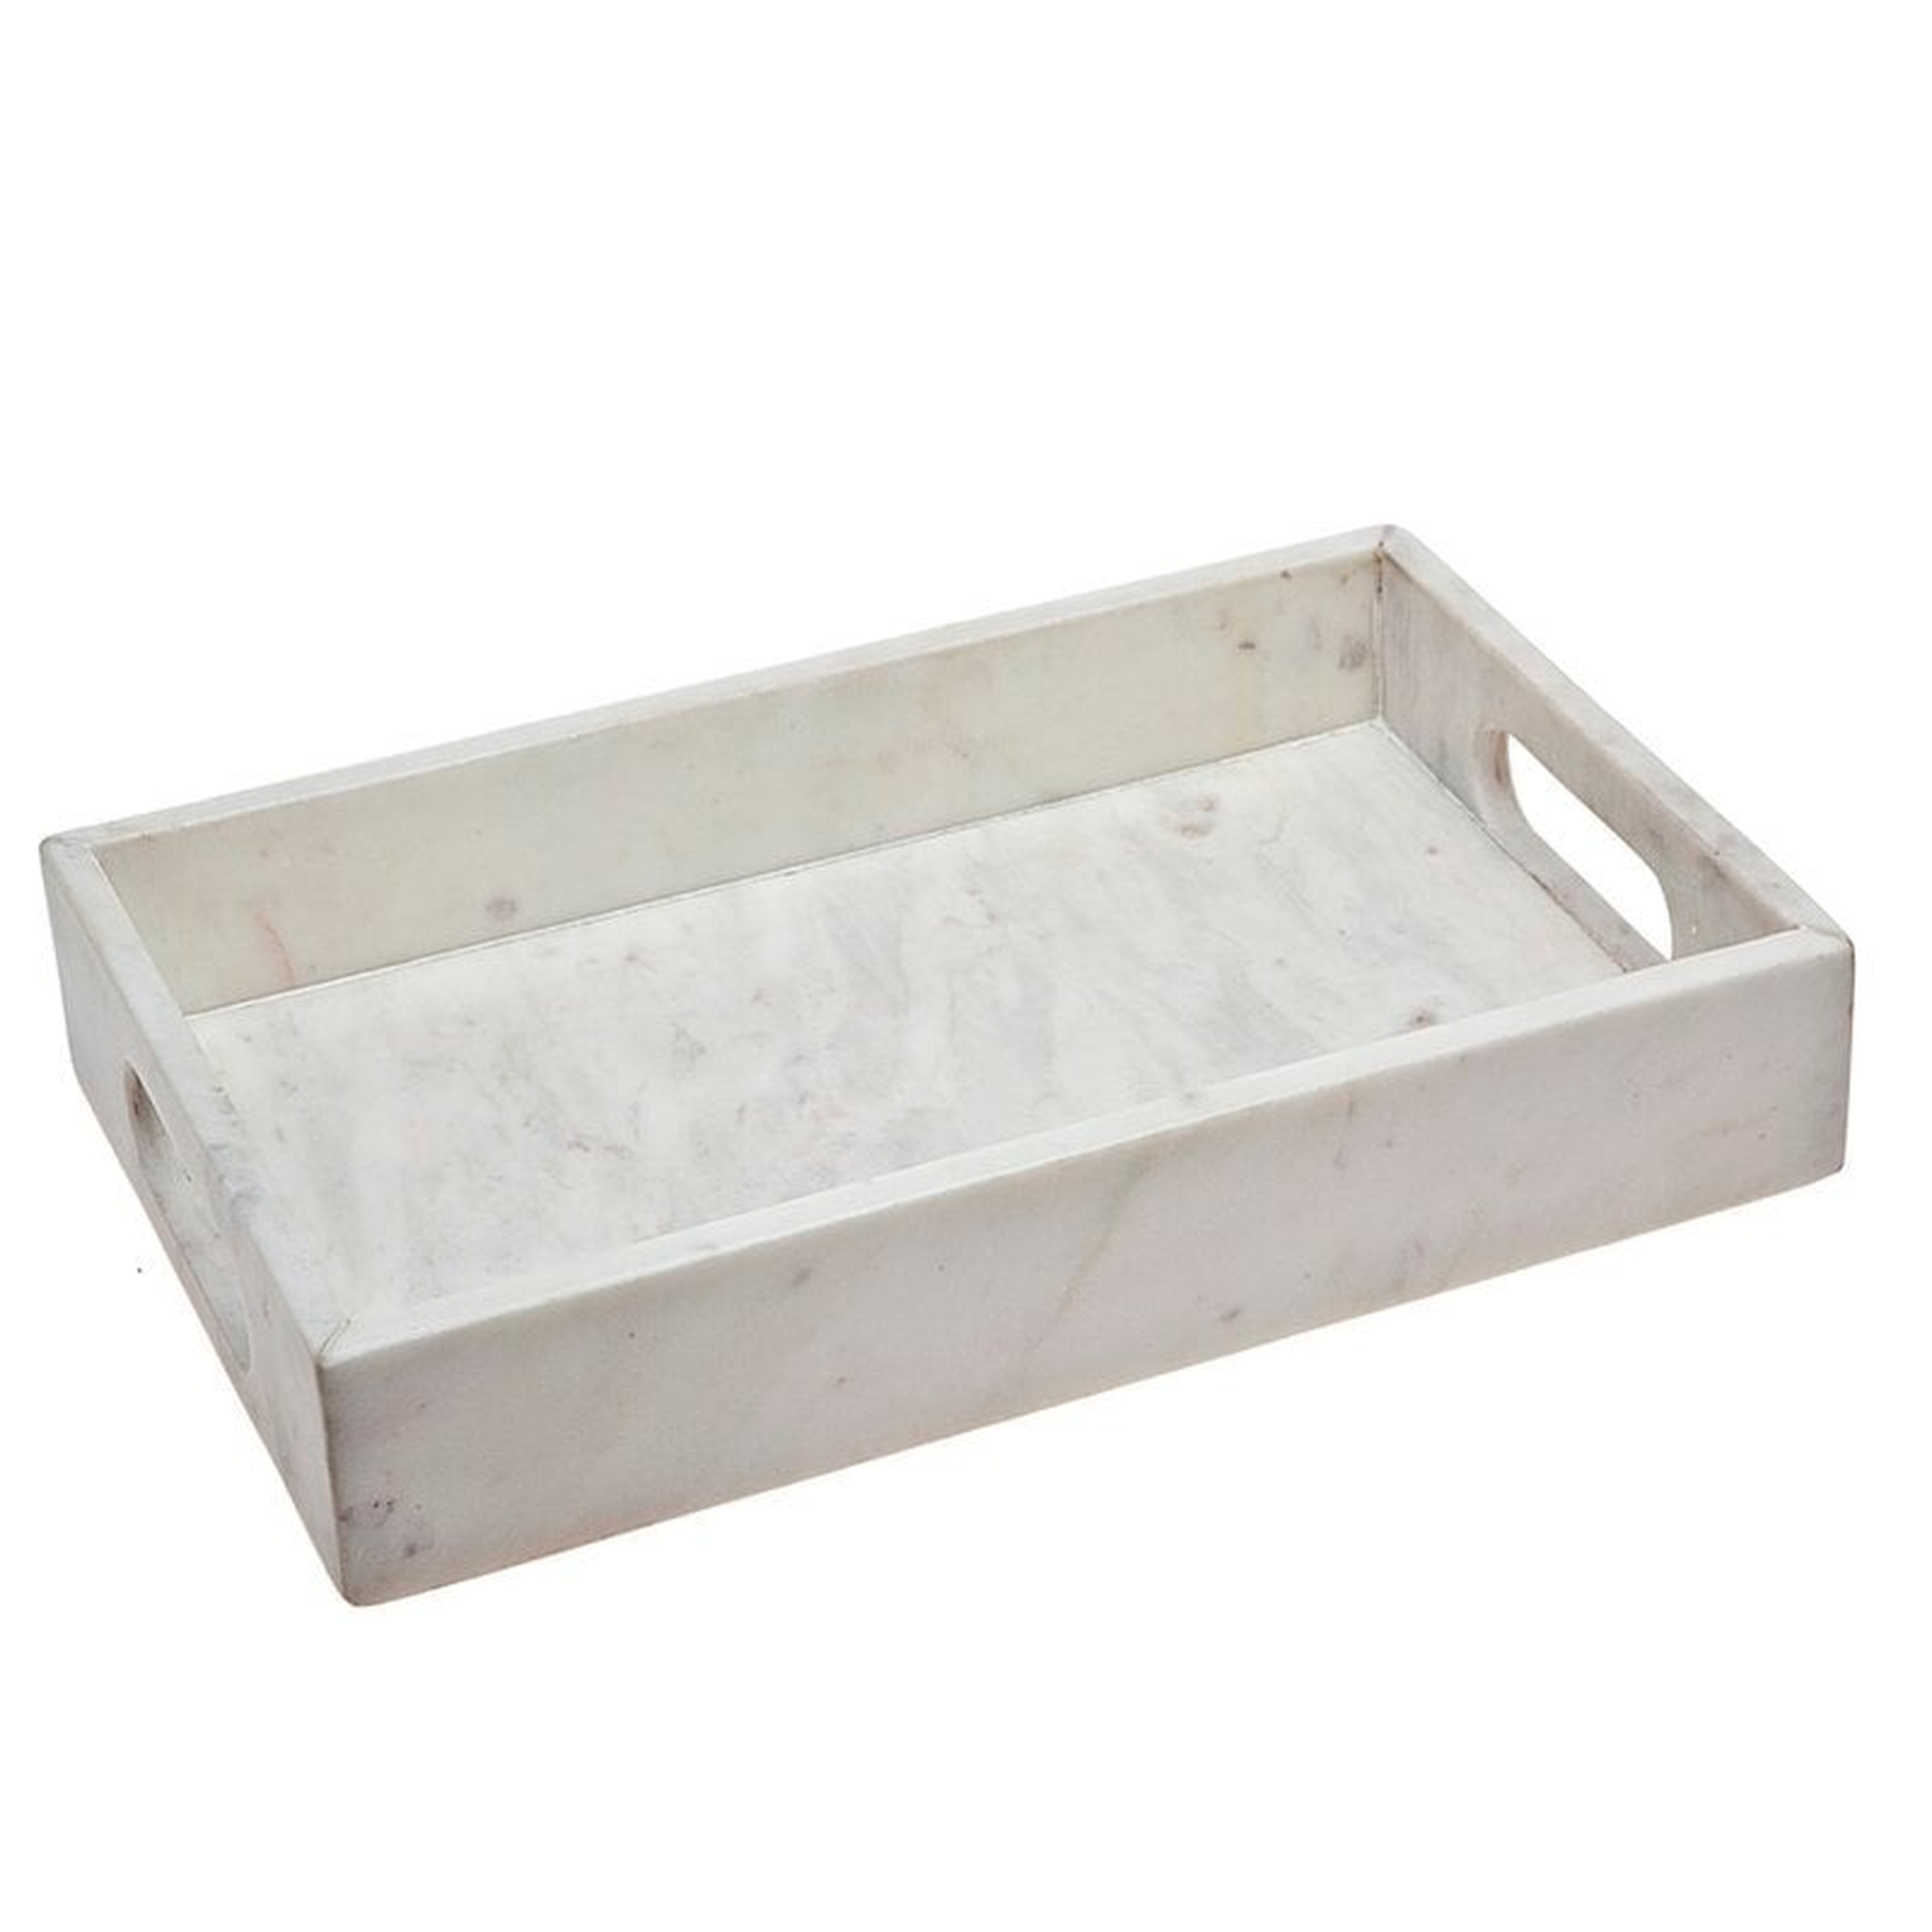 Whitfield Serving Tray - Wayfair